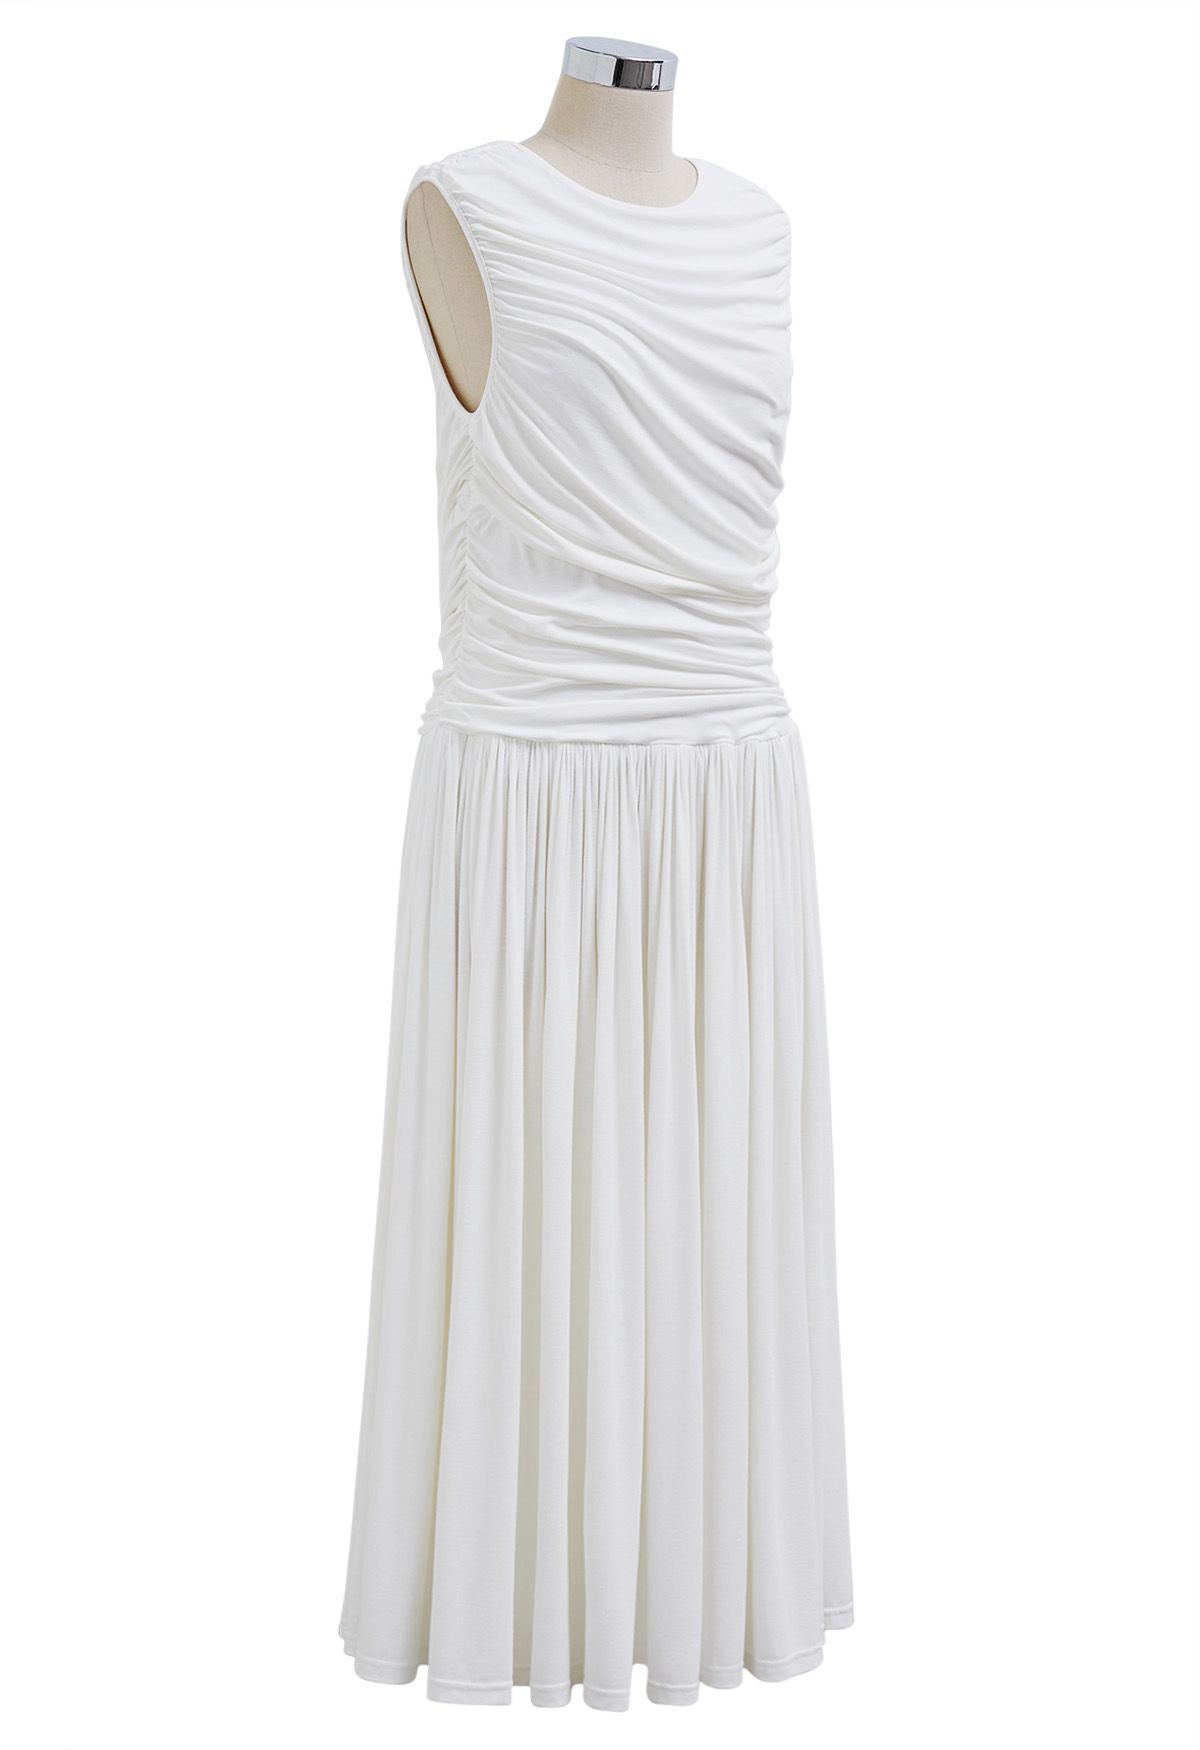 Effortless Ruched Sleeveless Cotton Dress in White